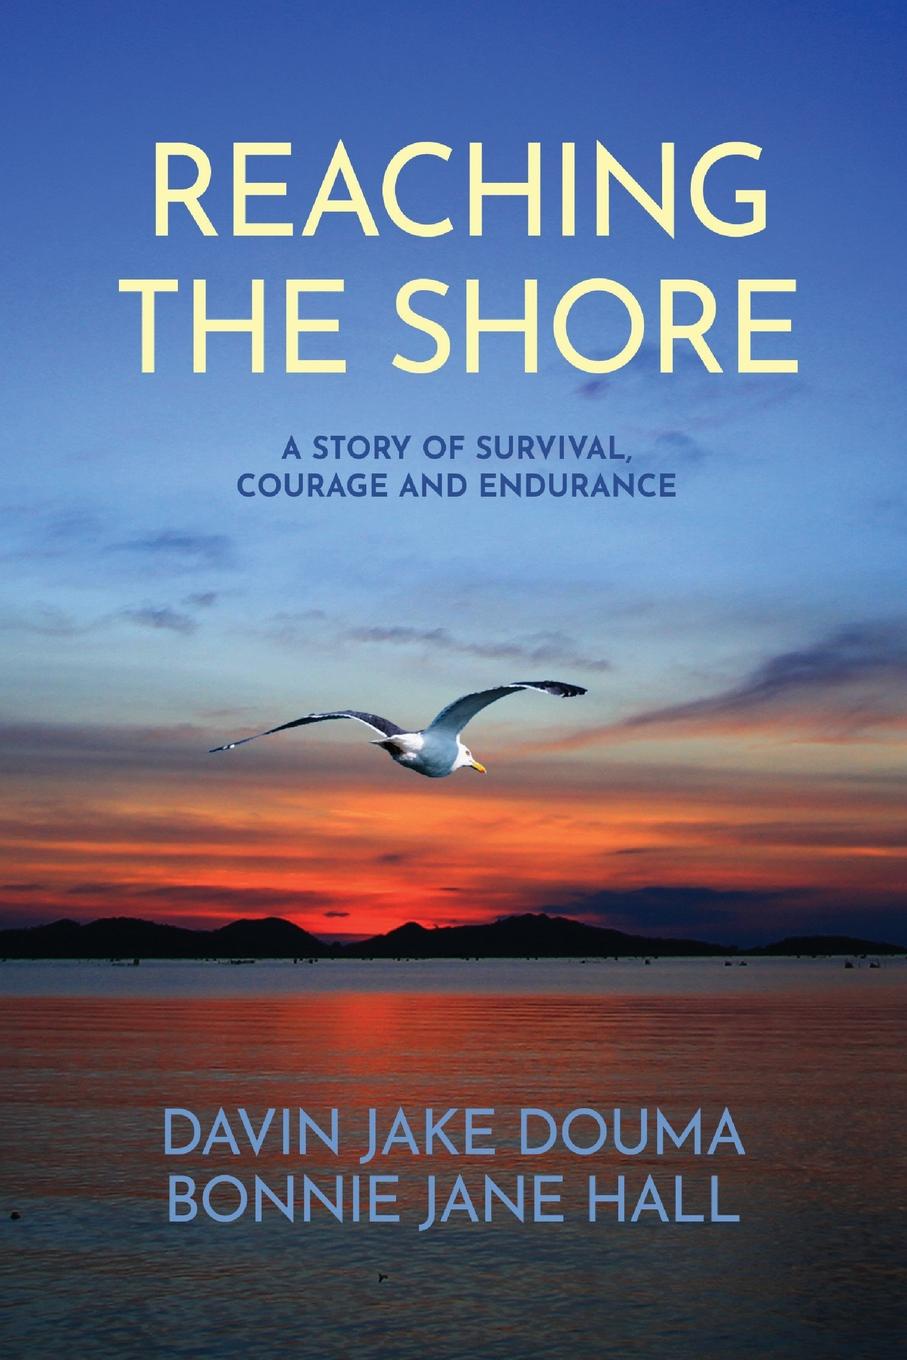 Reaching The Shore. A Story of Survival, Courage and Endurance